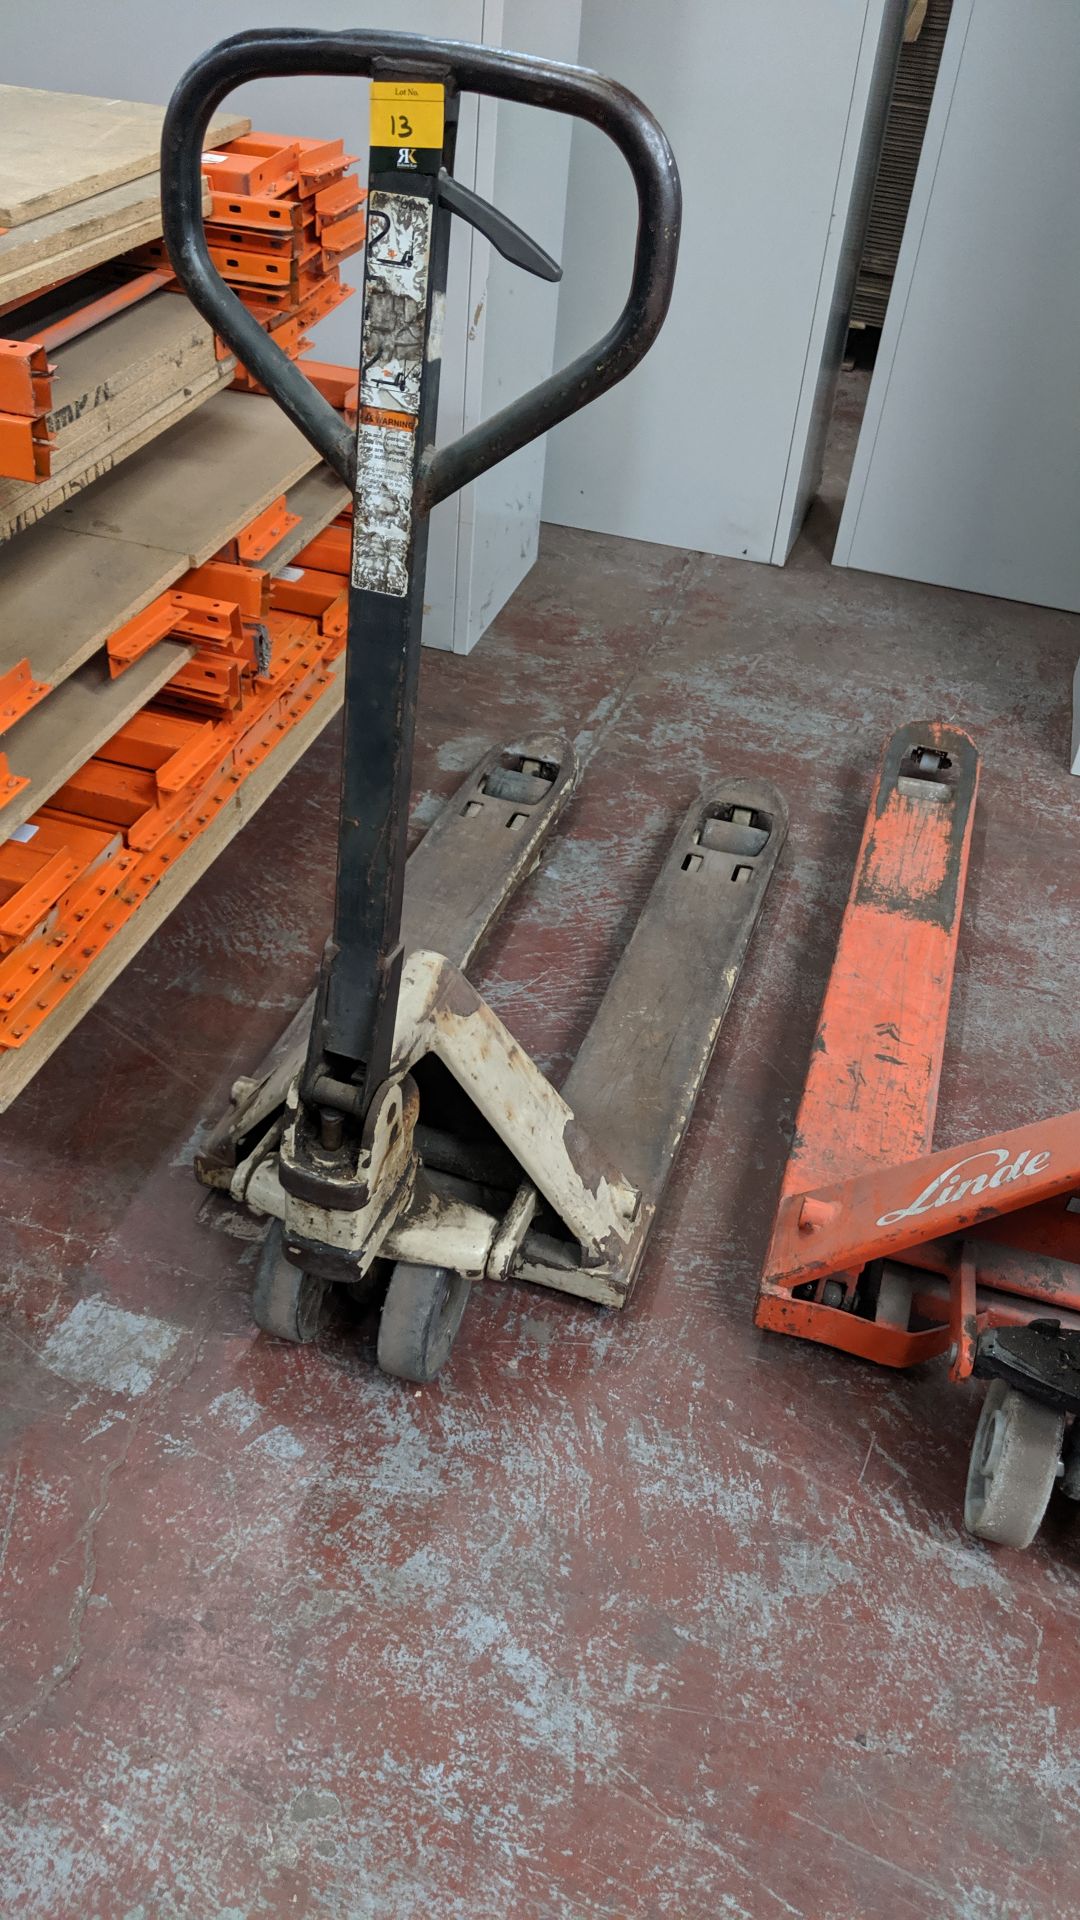 Euro pallet truck. This is one of a number of lots being sold on behalf of the liquidator of a